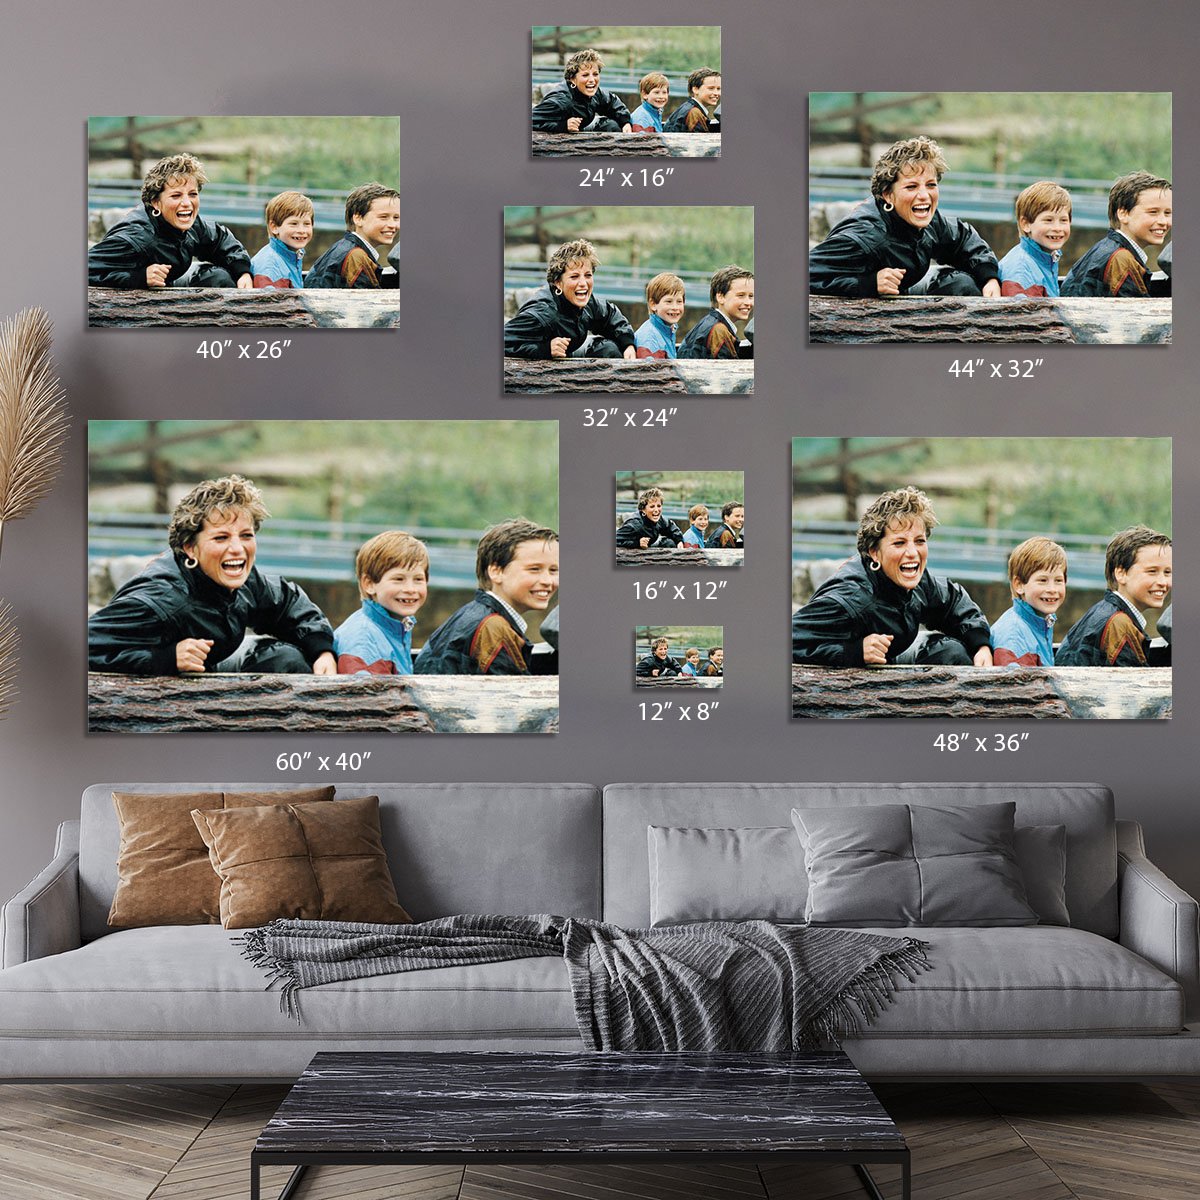 Princess Diana with Prince William and Prince Harry on ride Canvas Print or Poster